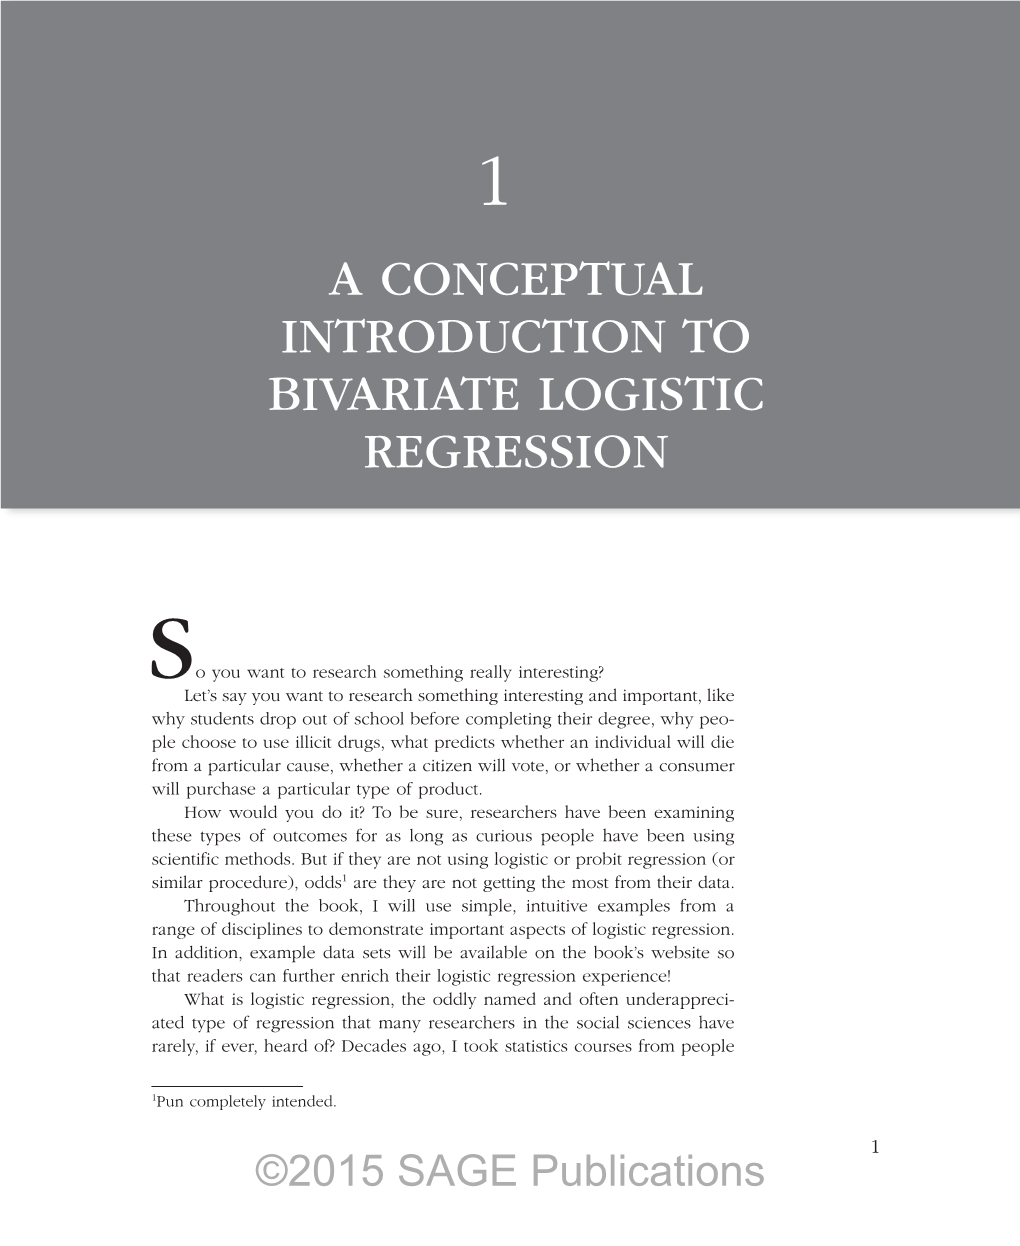 A Conceptual Introduction to Bivariate Logistic Regression